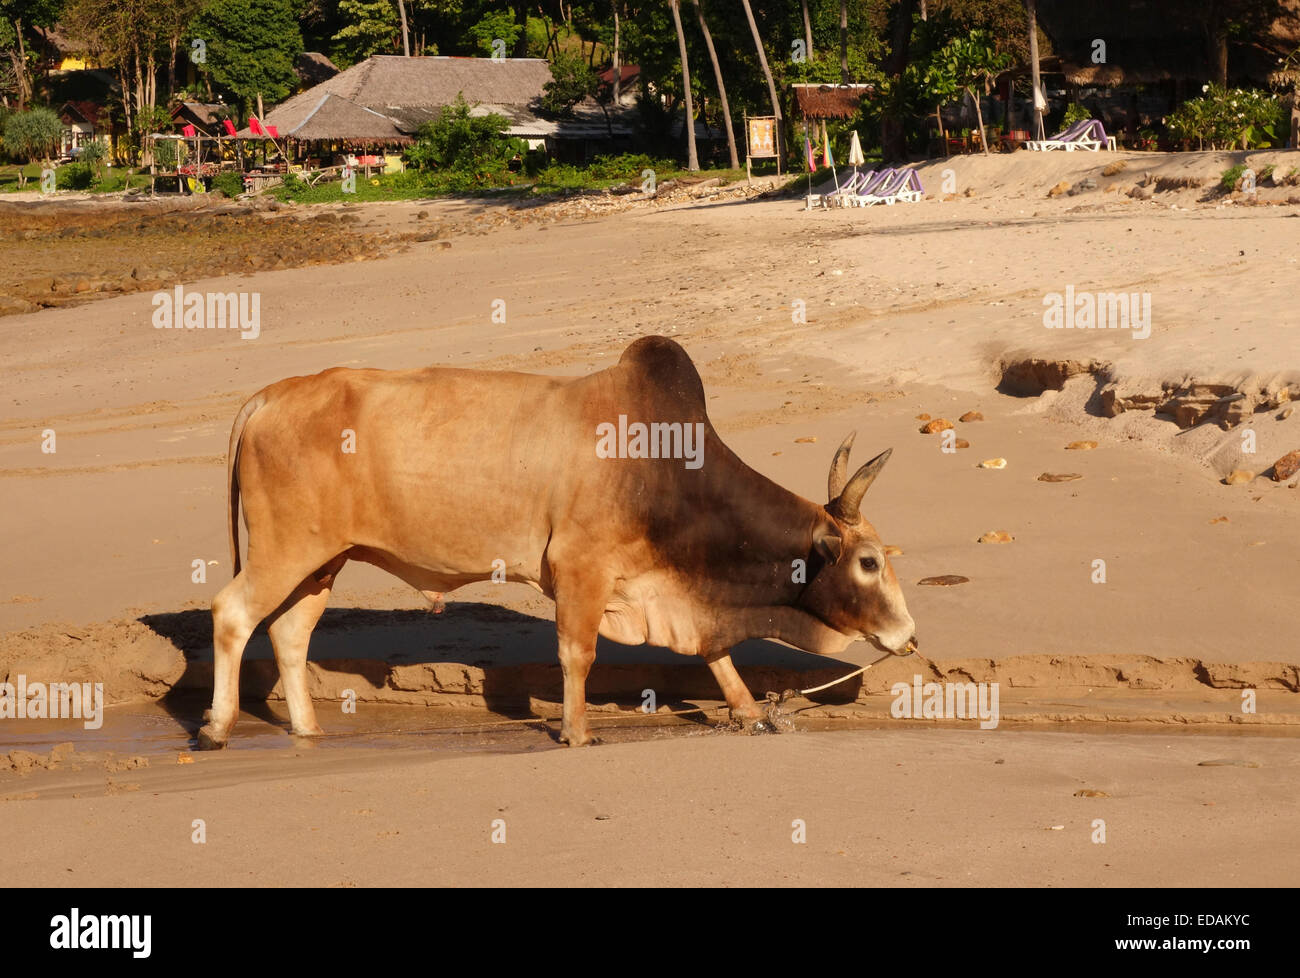 Bull of Asian Cattle breed on beach. Resort in background. Koh Ko Lanta, Thailand South-east Asia. Stock Photo